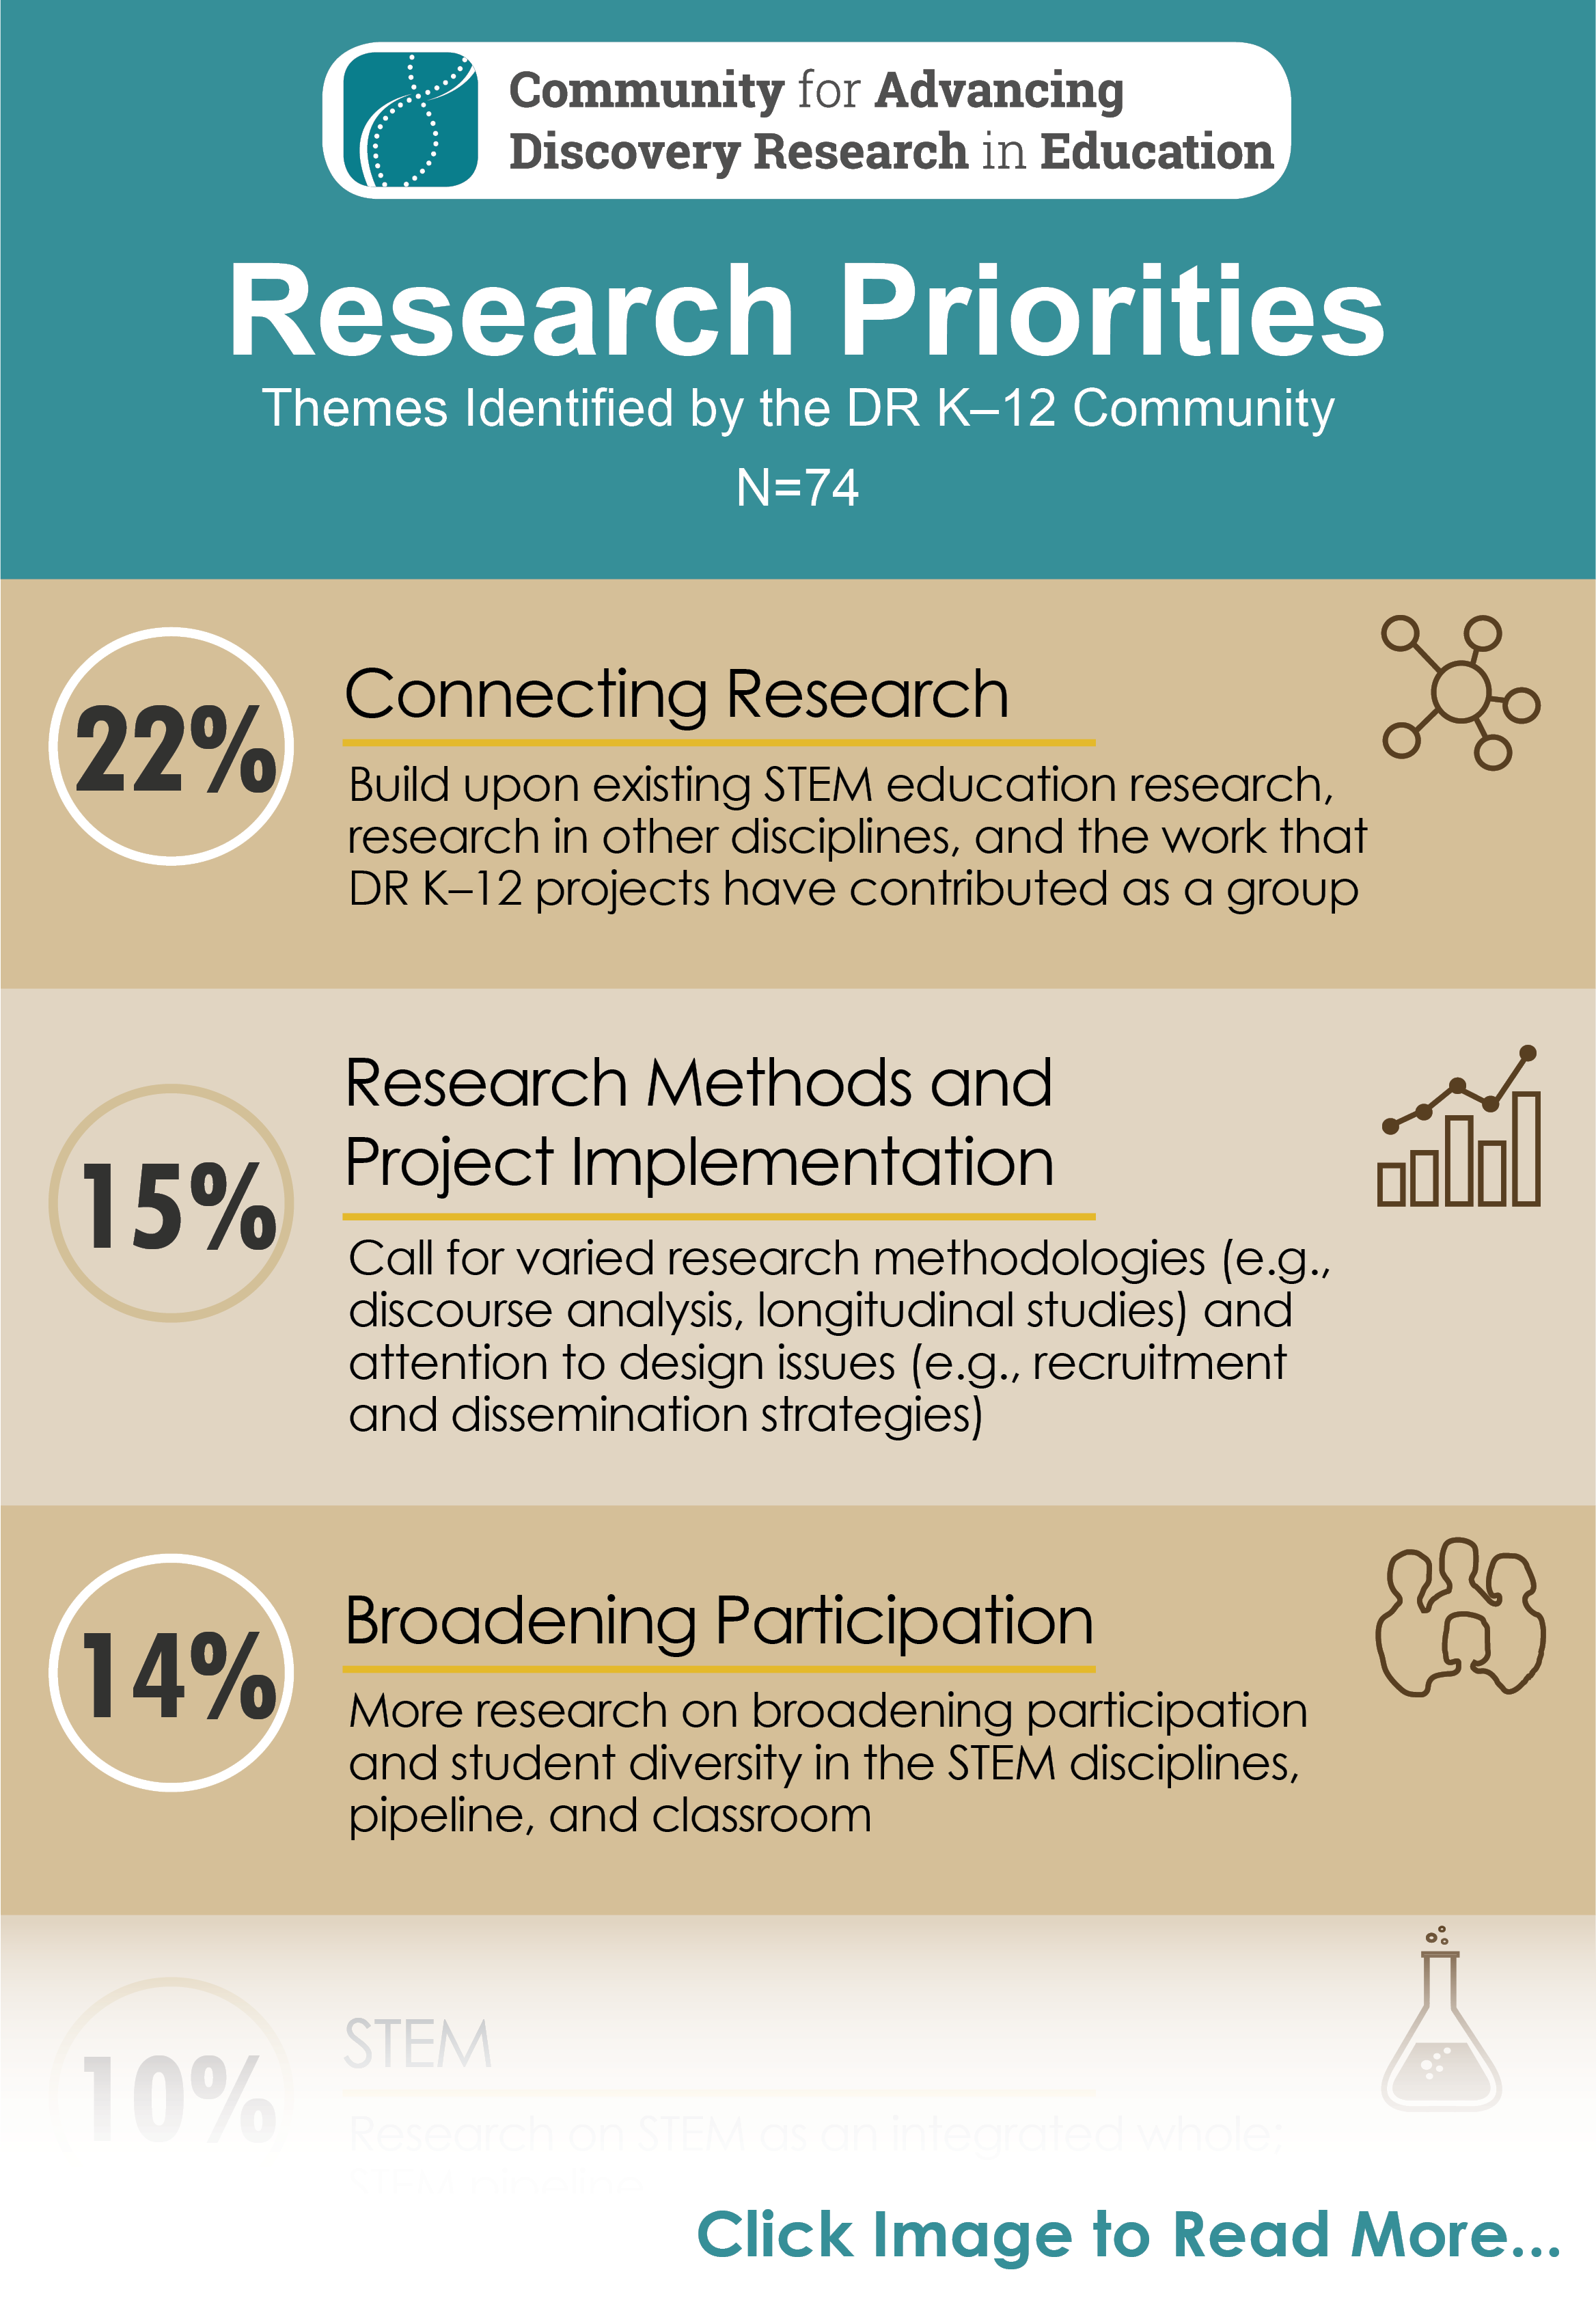 Partial Research Priorities Infographic